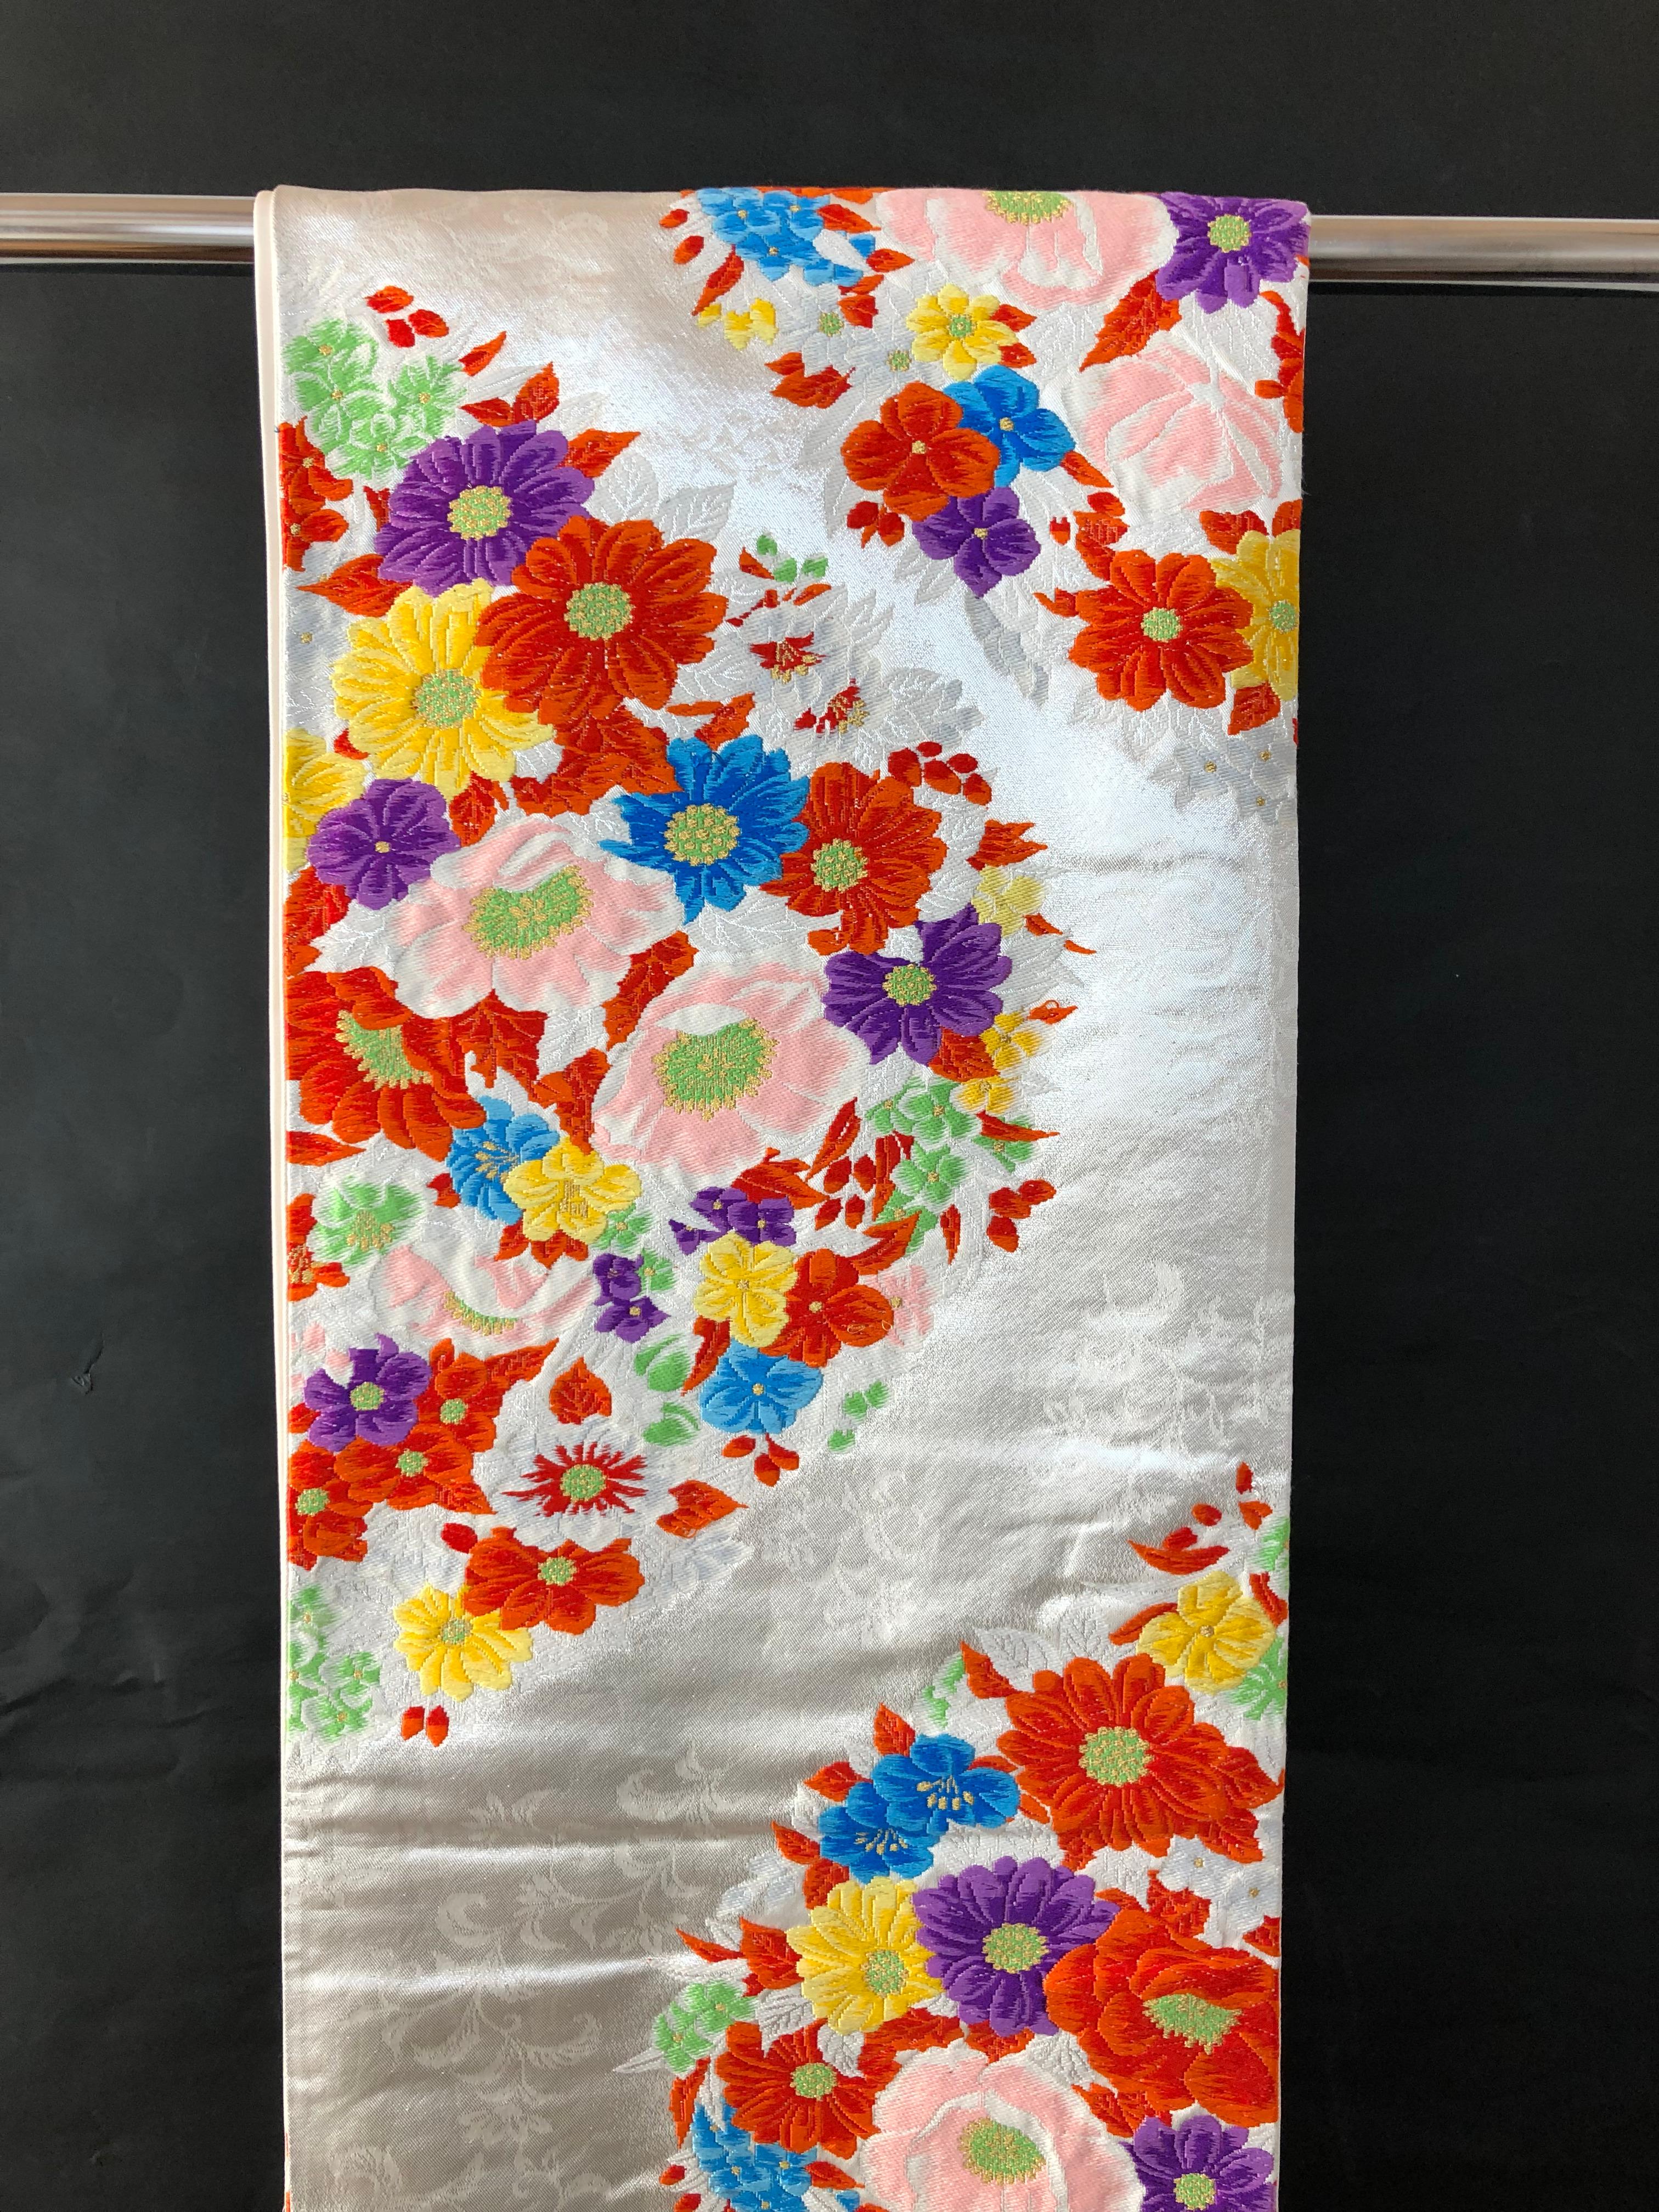 Japanese Vintage Kimono Obi selected by Kimono-Couture

-Dimension: 416×31cm
-Condition: Very Good Condition
-Shipping Method: DHL

The Japanese kimono obi is a traditional Japanese craft that is produced through countless processes.
Kimono obis are